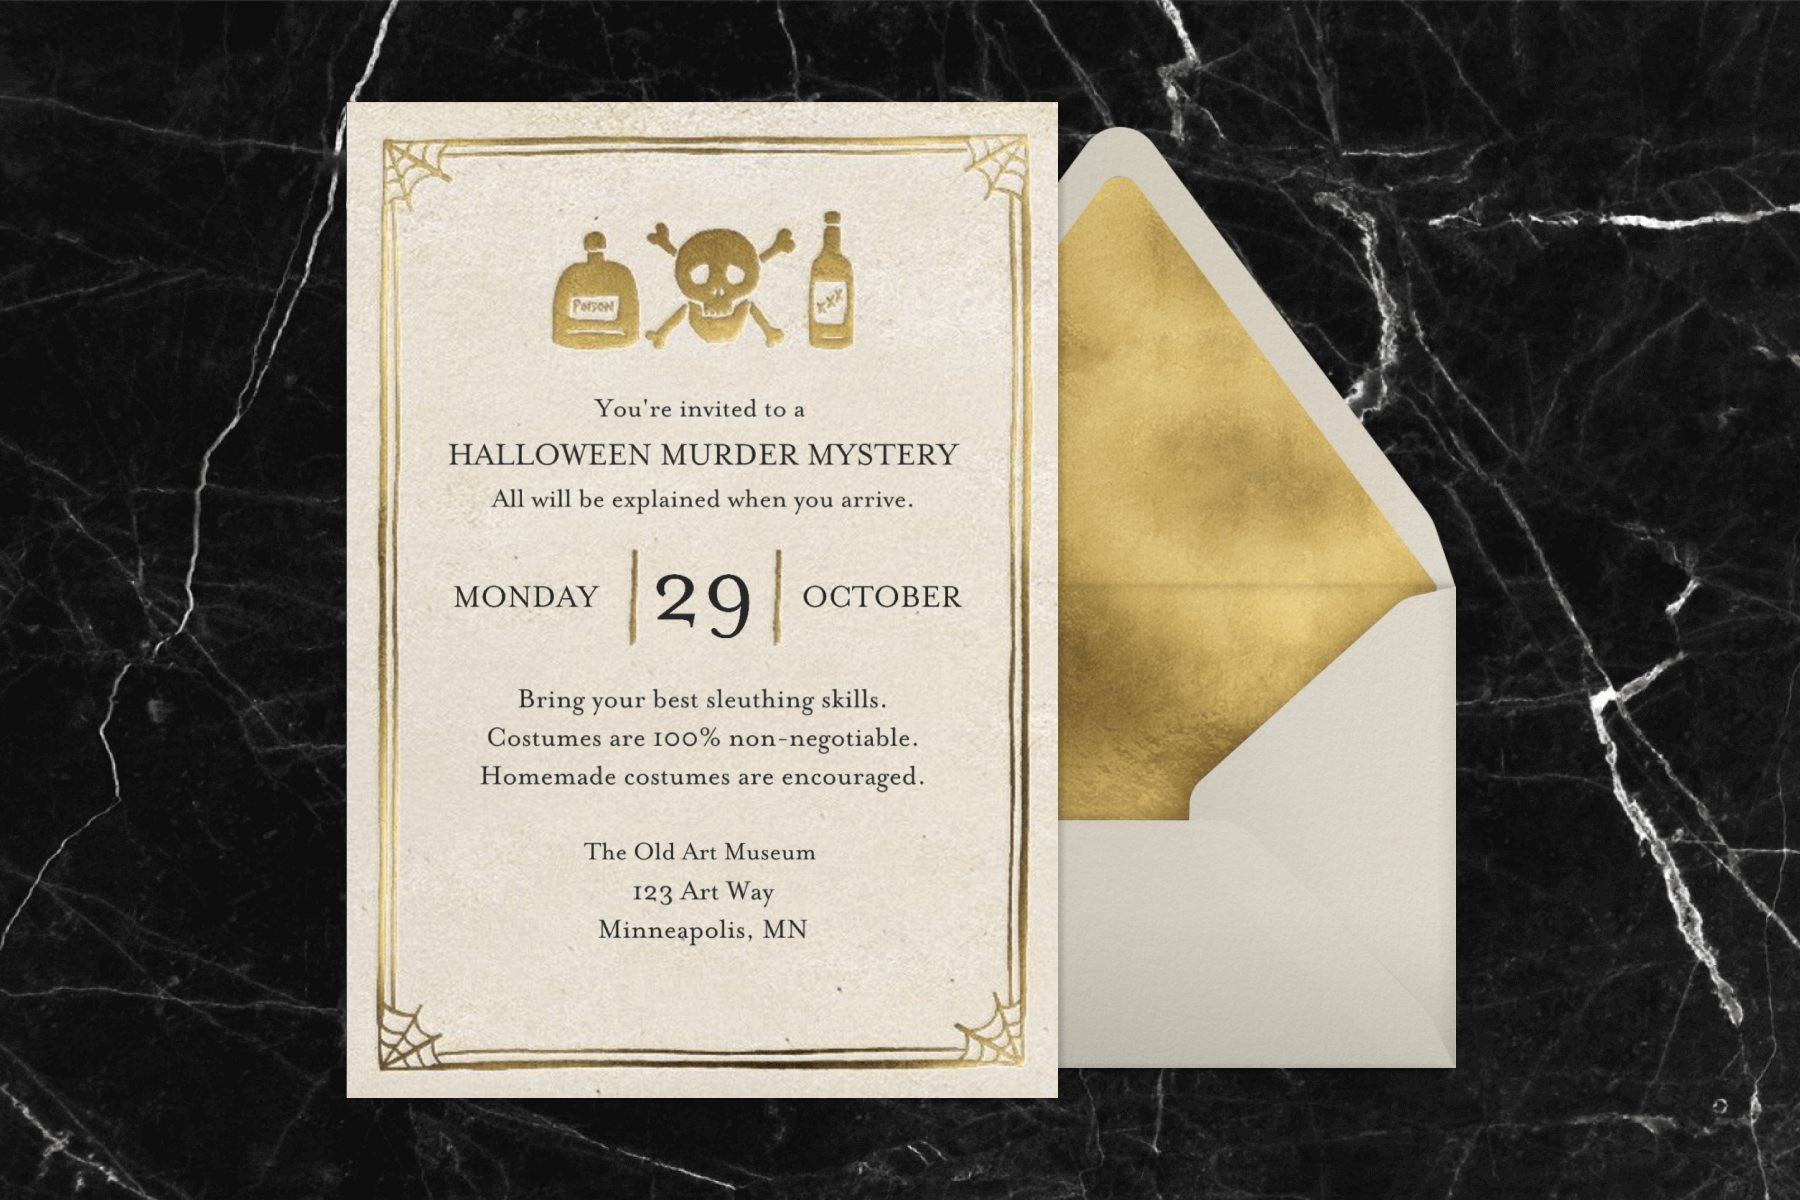 A Halloween murder mystery party invitation has a gold border with cobwebs in the corners and gold poison bottles and a skull and crossbones at the top beside a matching envelope with gold liner on a black marble background.